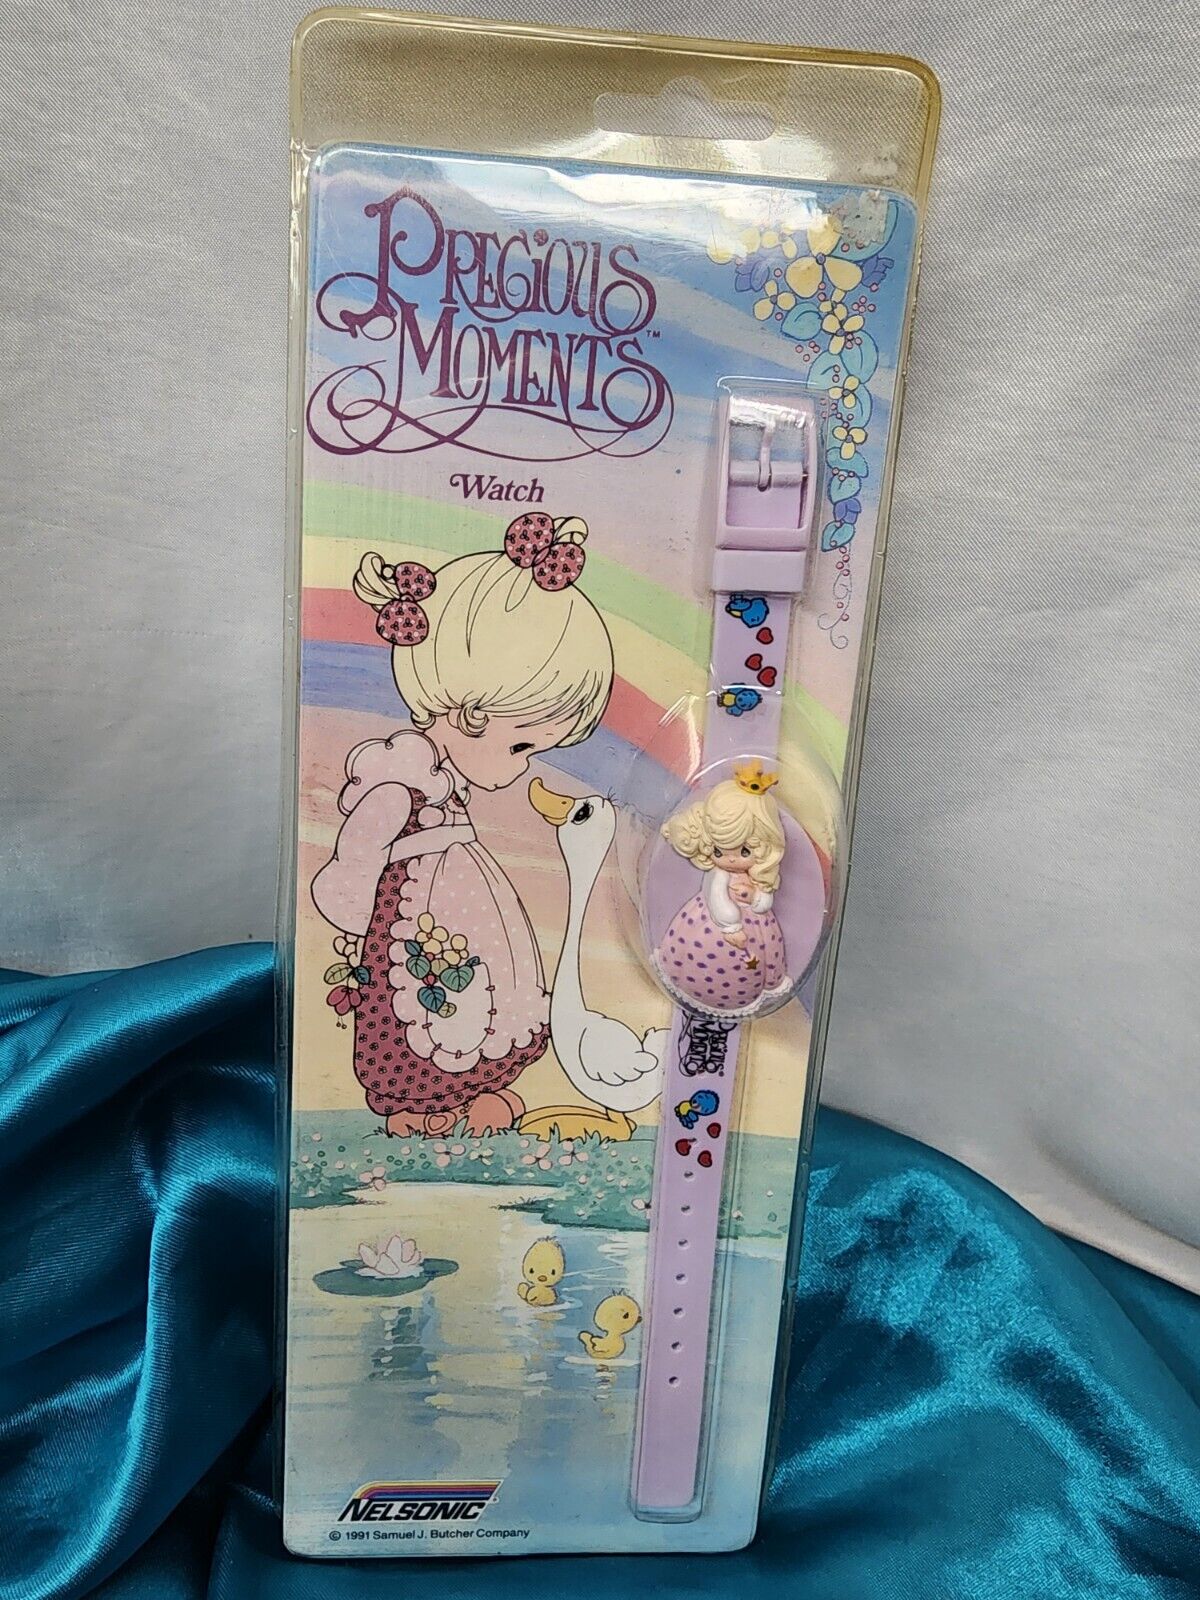 Vintage 1991 Nelsonic Precious Moments girls watch *Factory Sealed* princess 